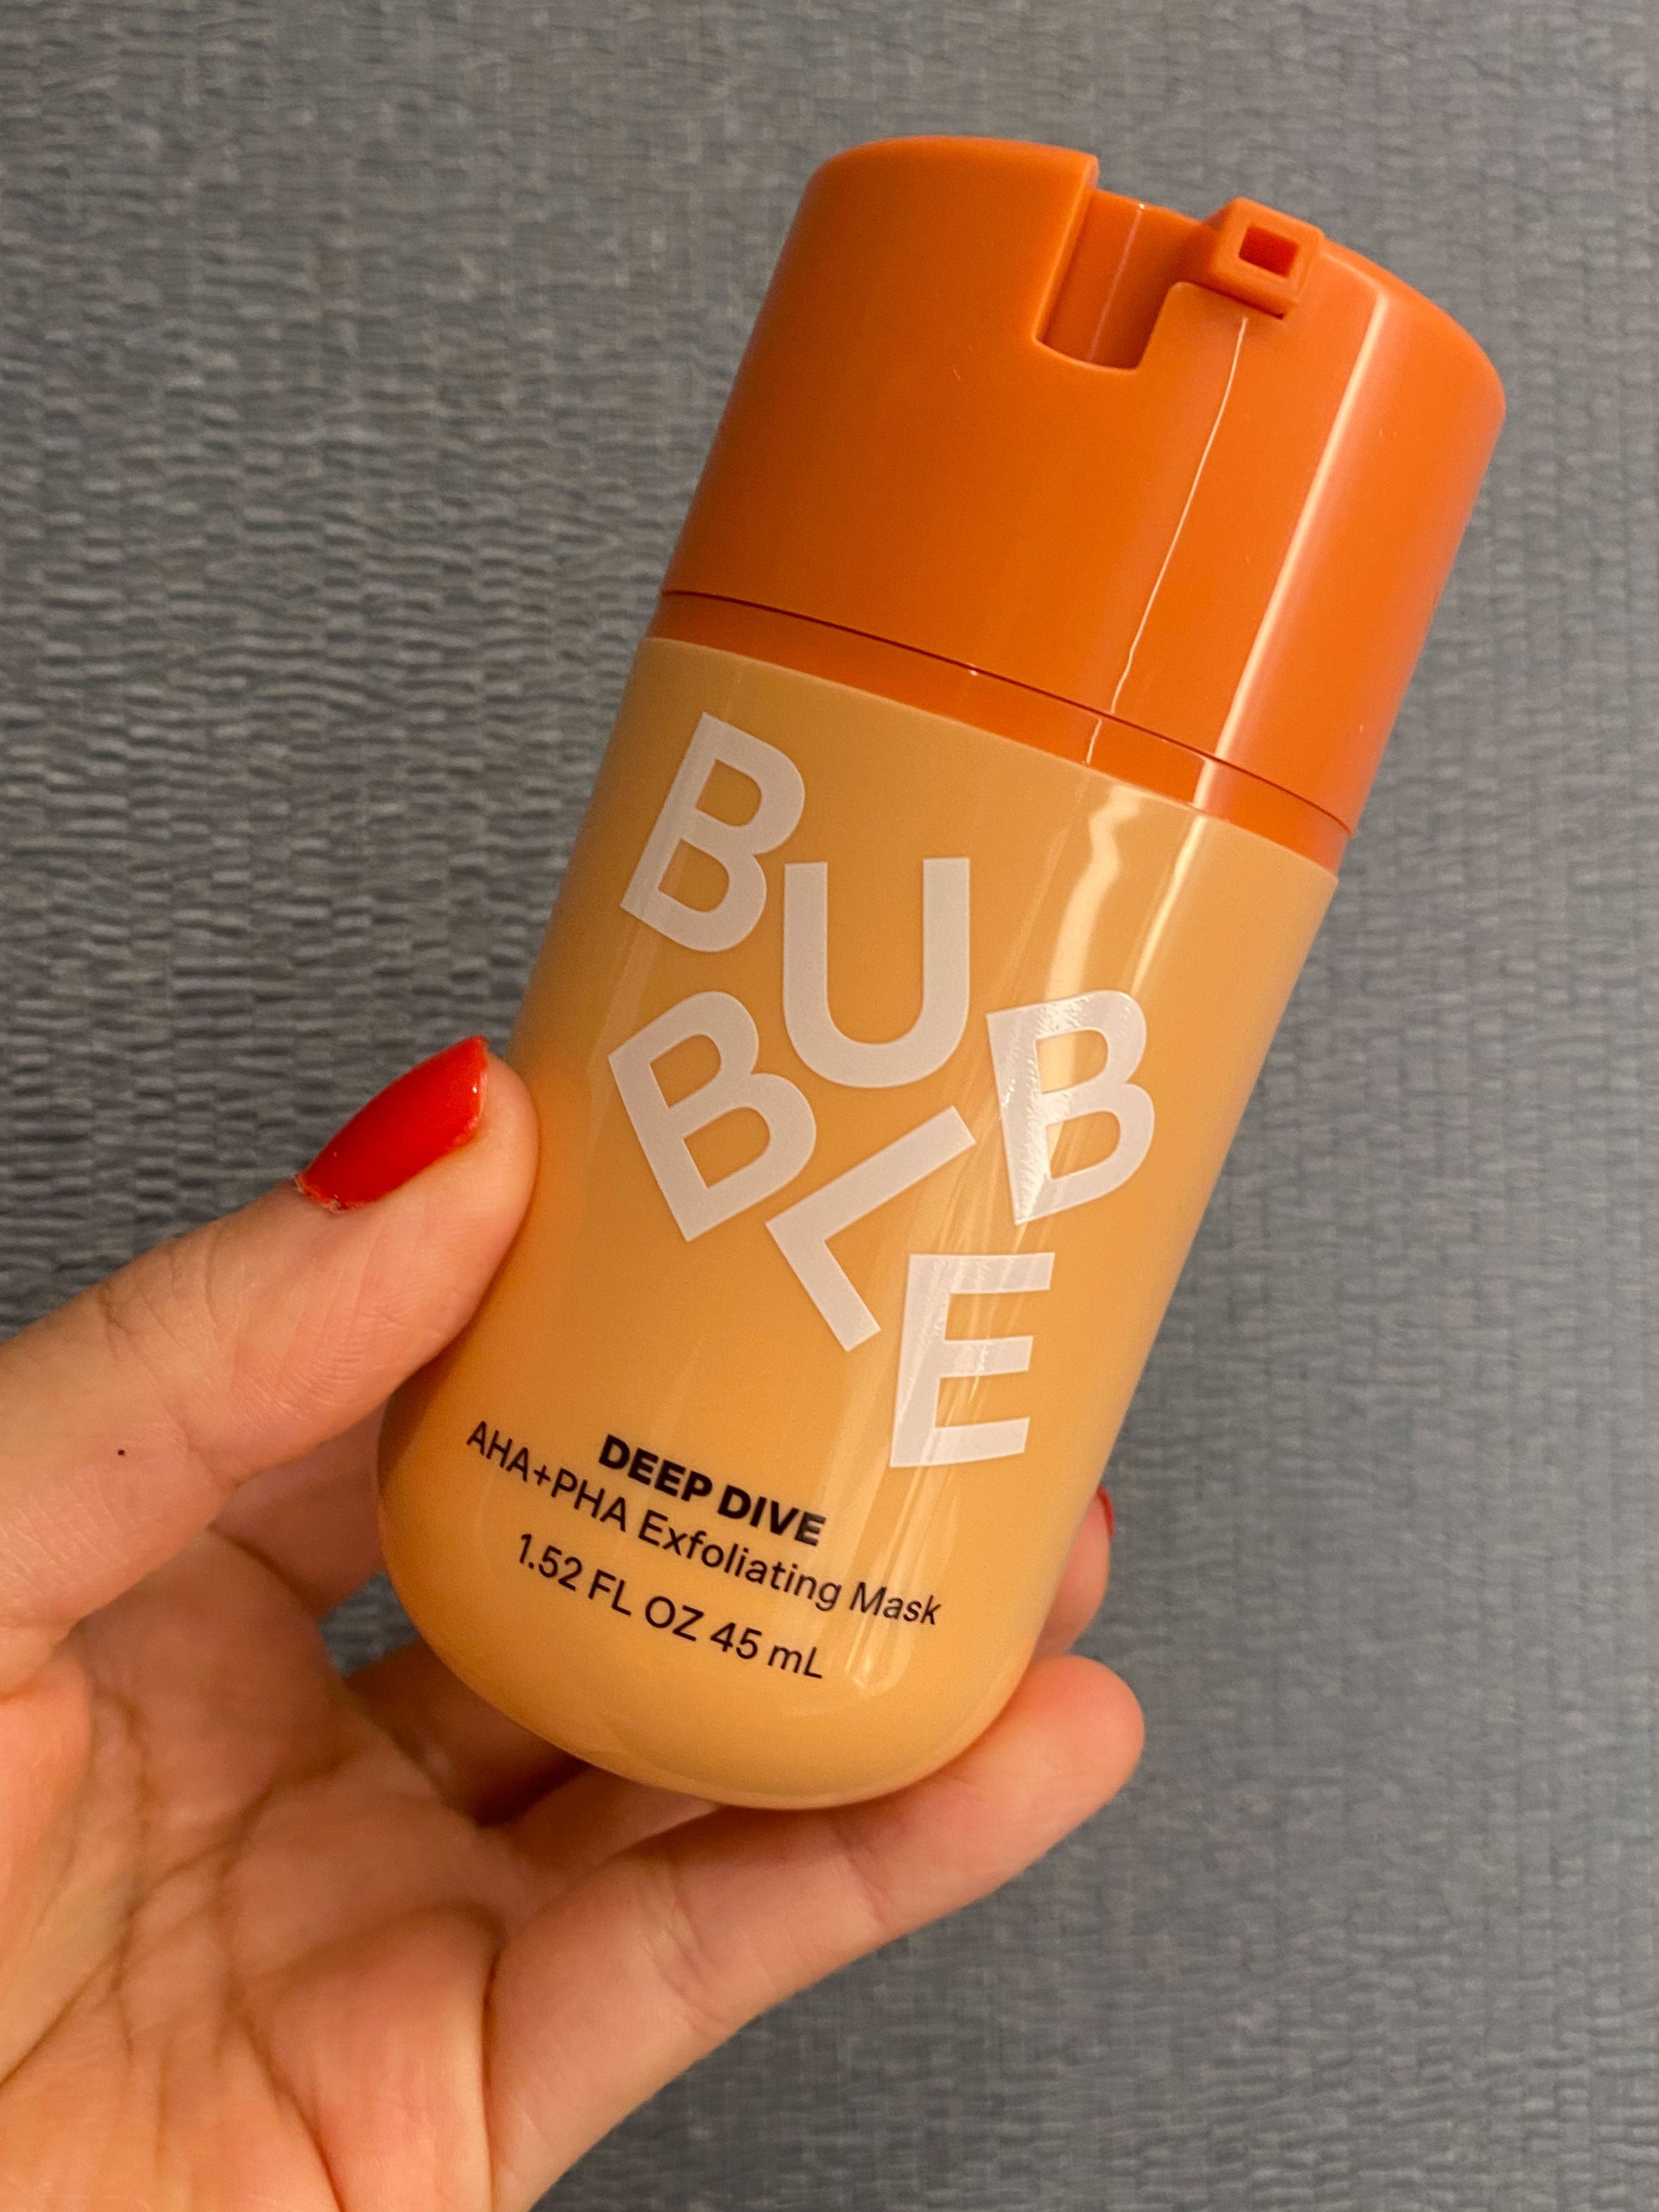 My Thoughts on Bubble Skin Care 